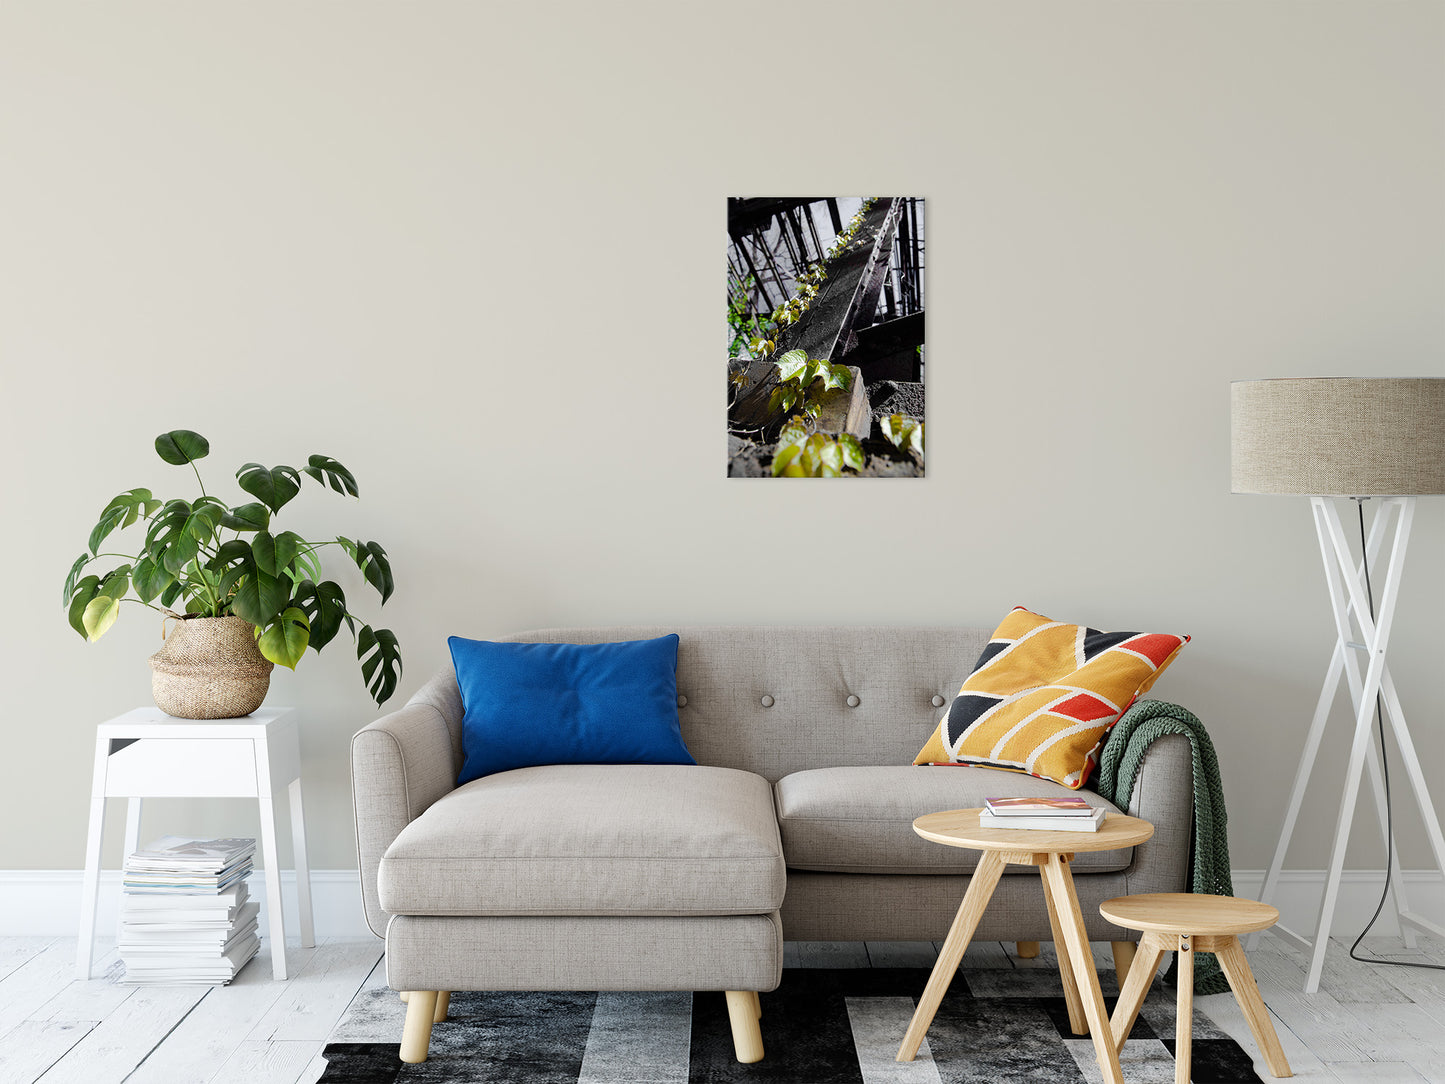 Nature Taking Over Botanical / Nature Photo Fine Art Canvas Wall Art Prints 20" x 24" - PIPAFINEART